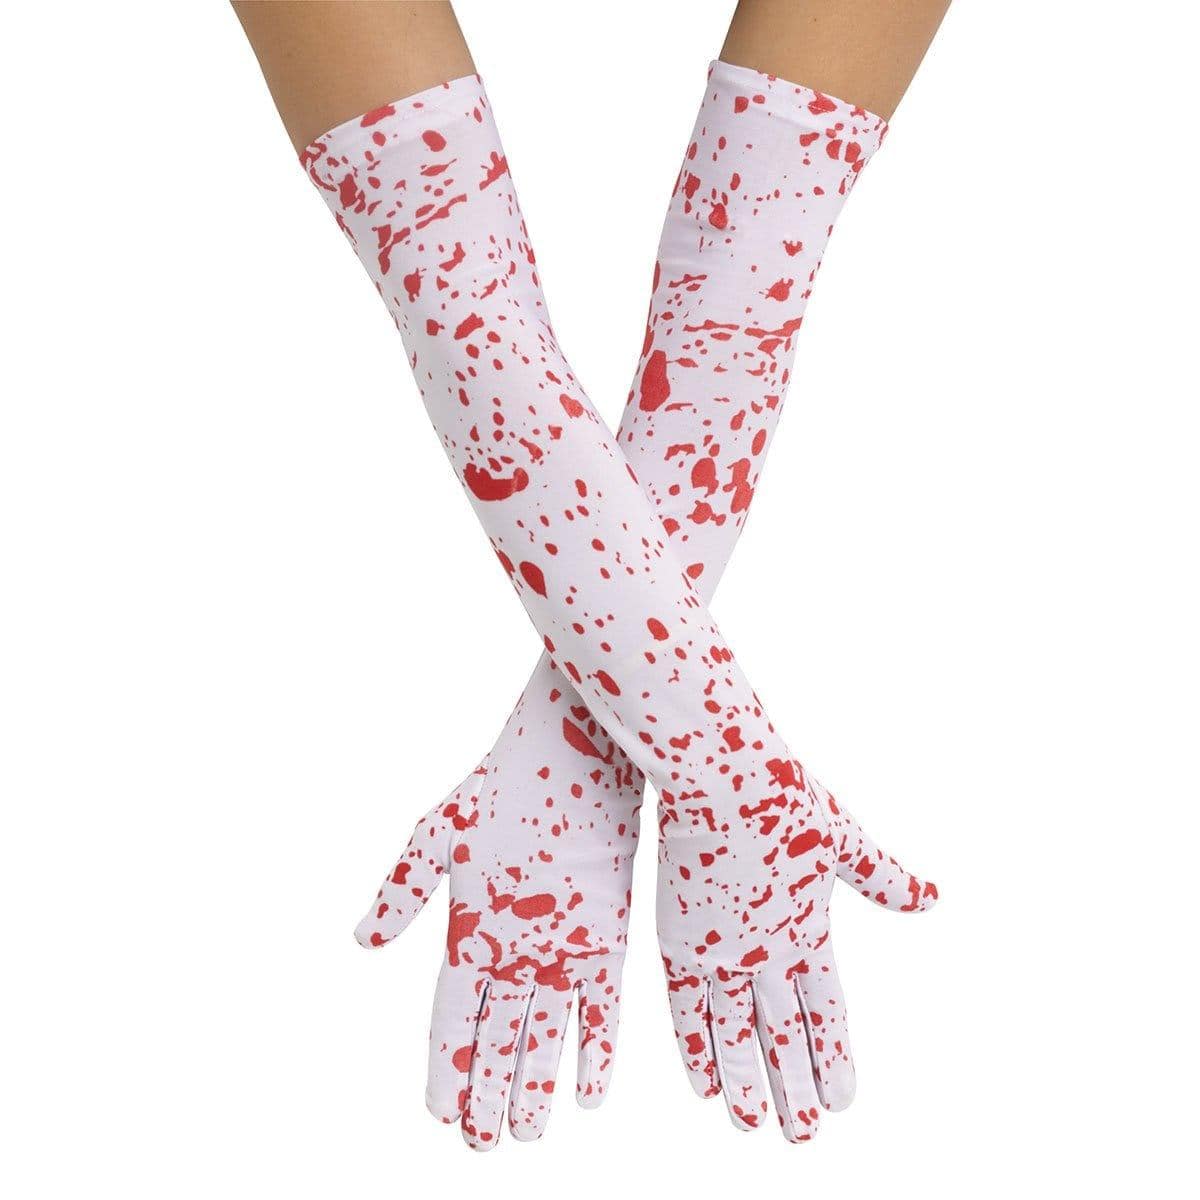 Buy Costume Accessories Bloody Gloves for Adults sold at Party Expert